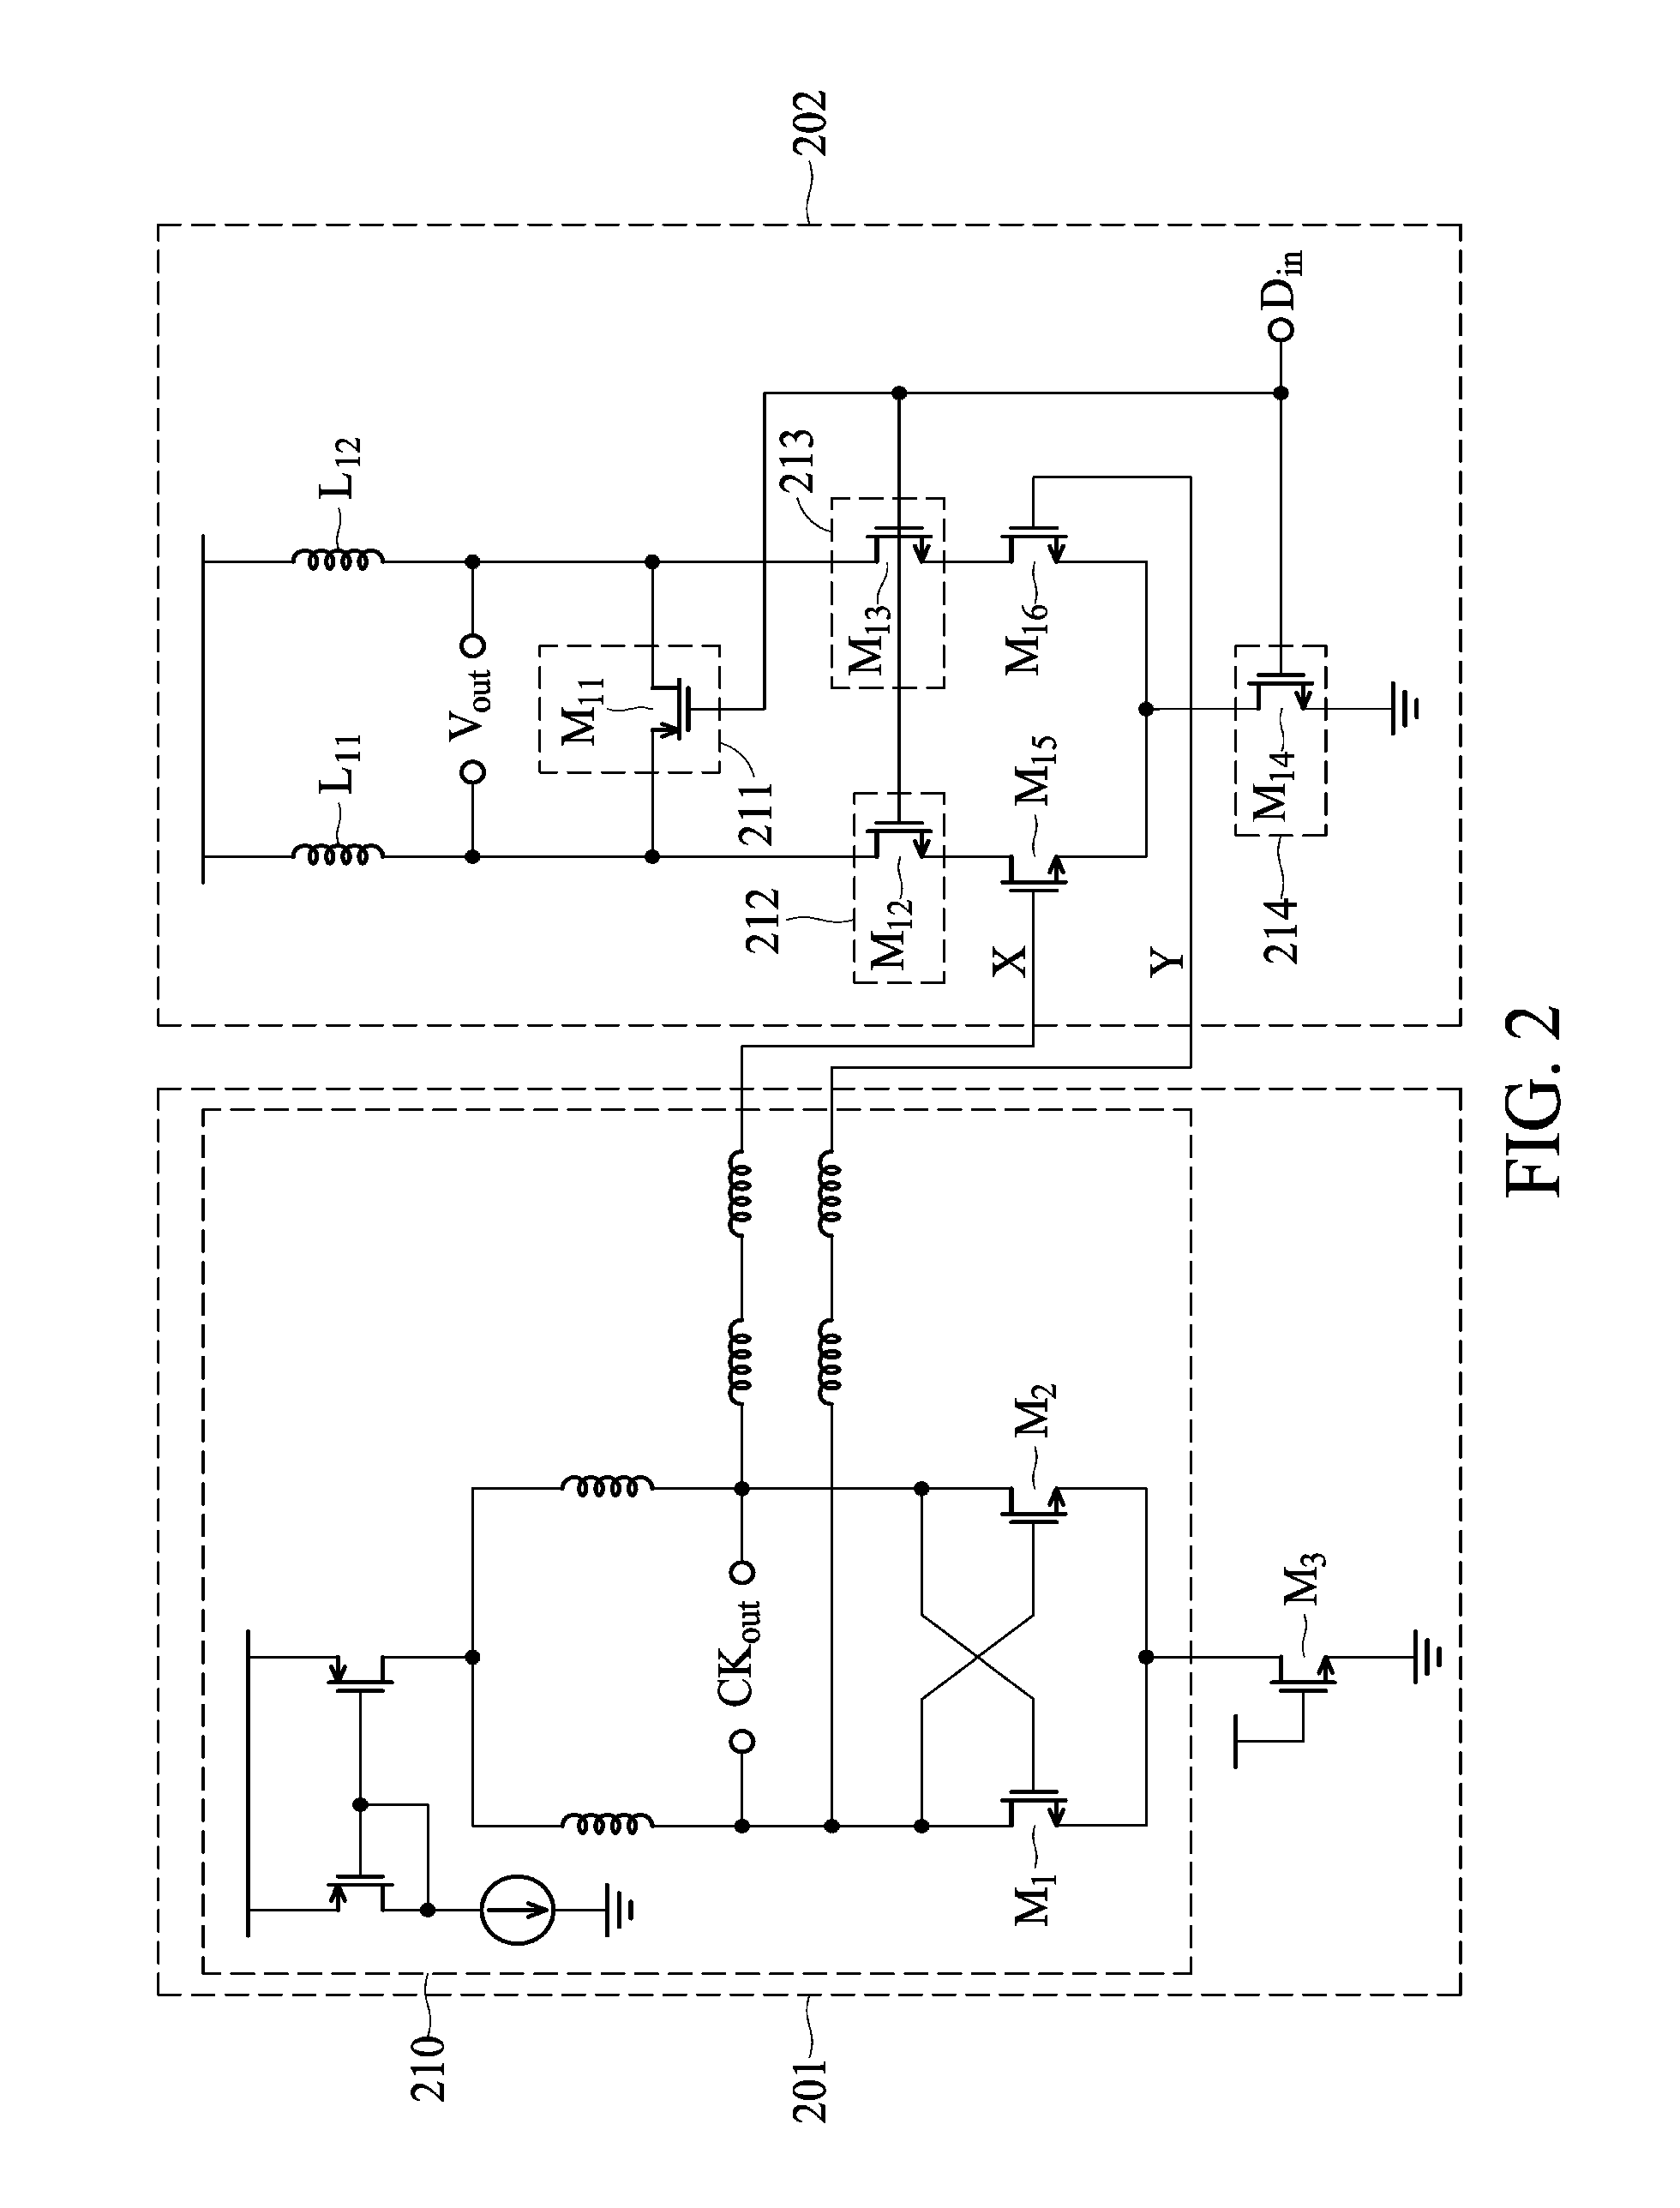 Wireless radio frequency signal transceiving system